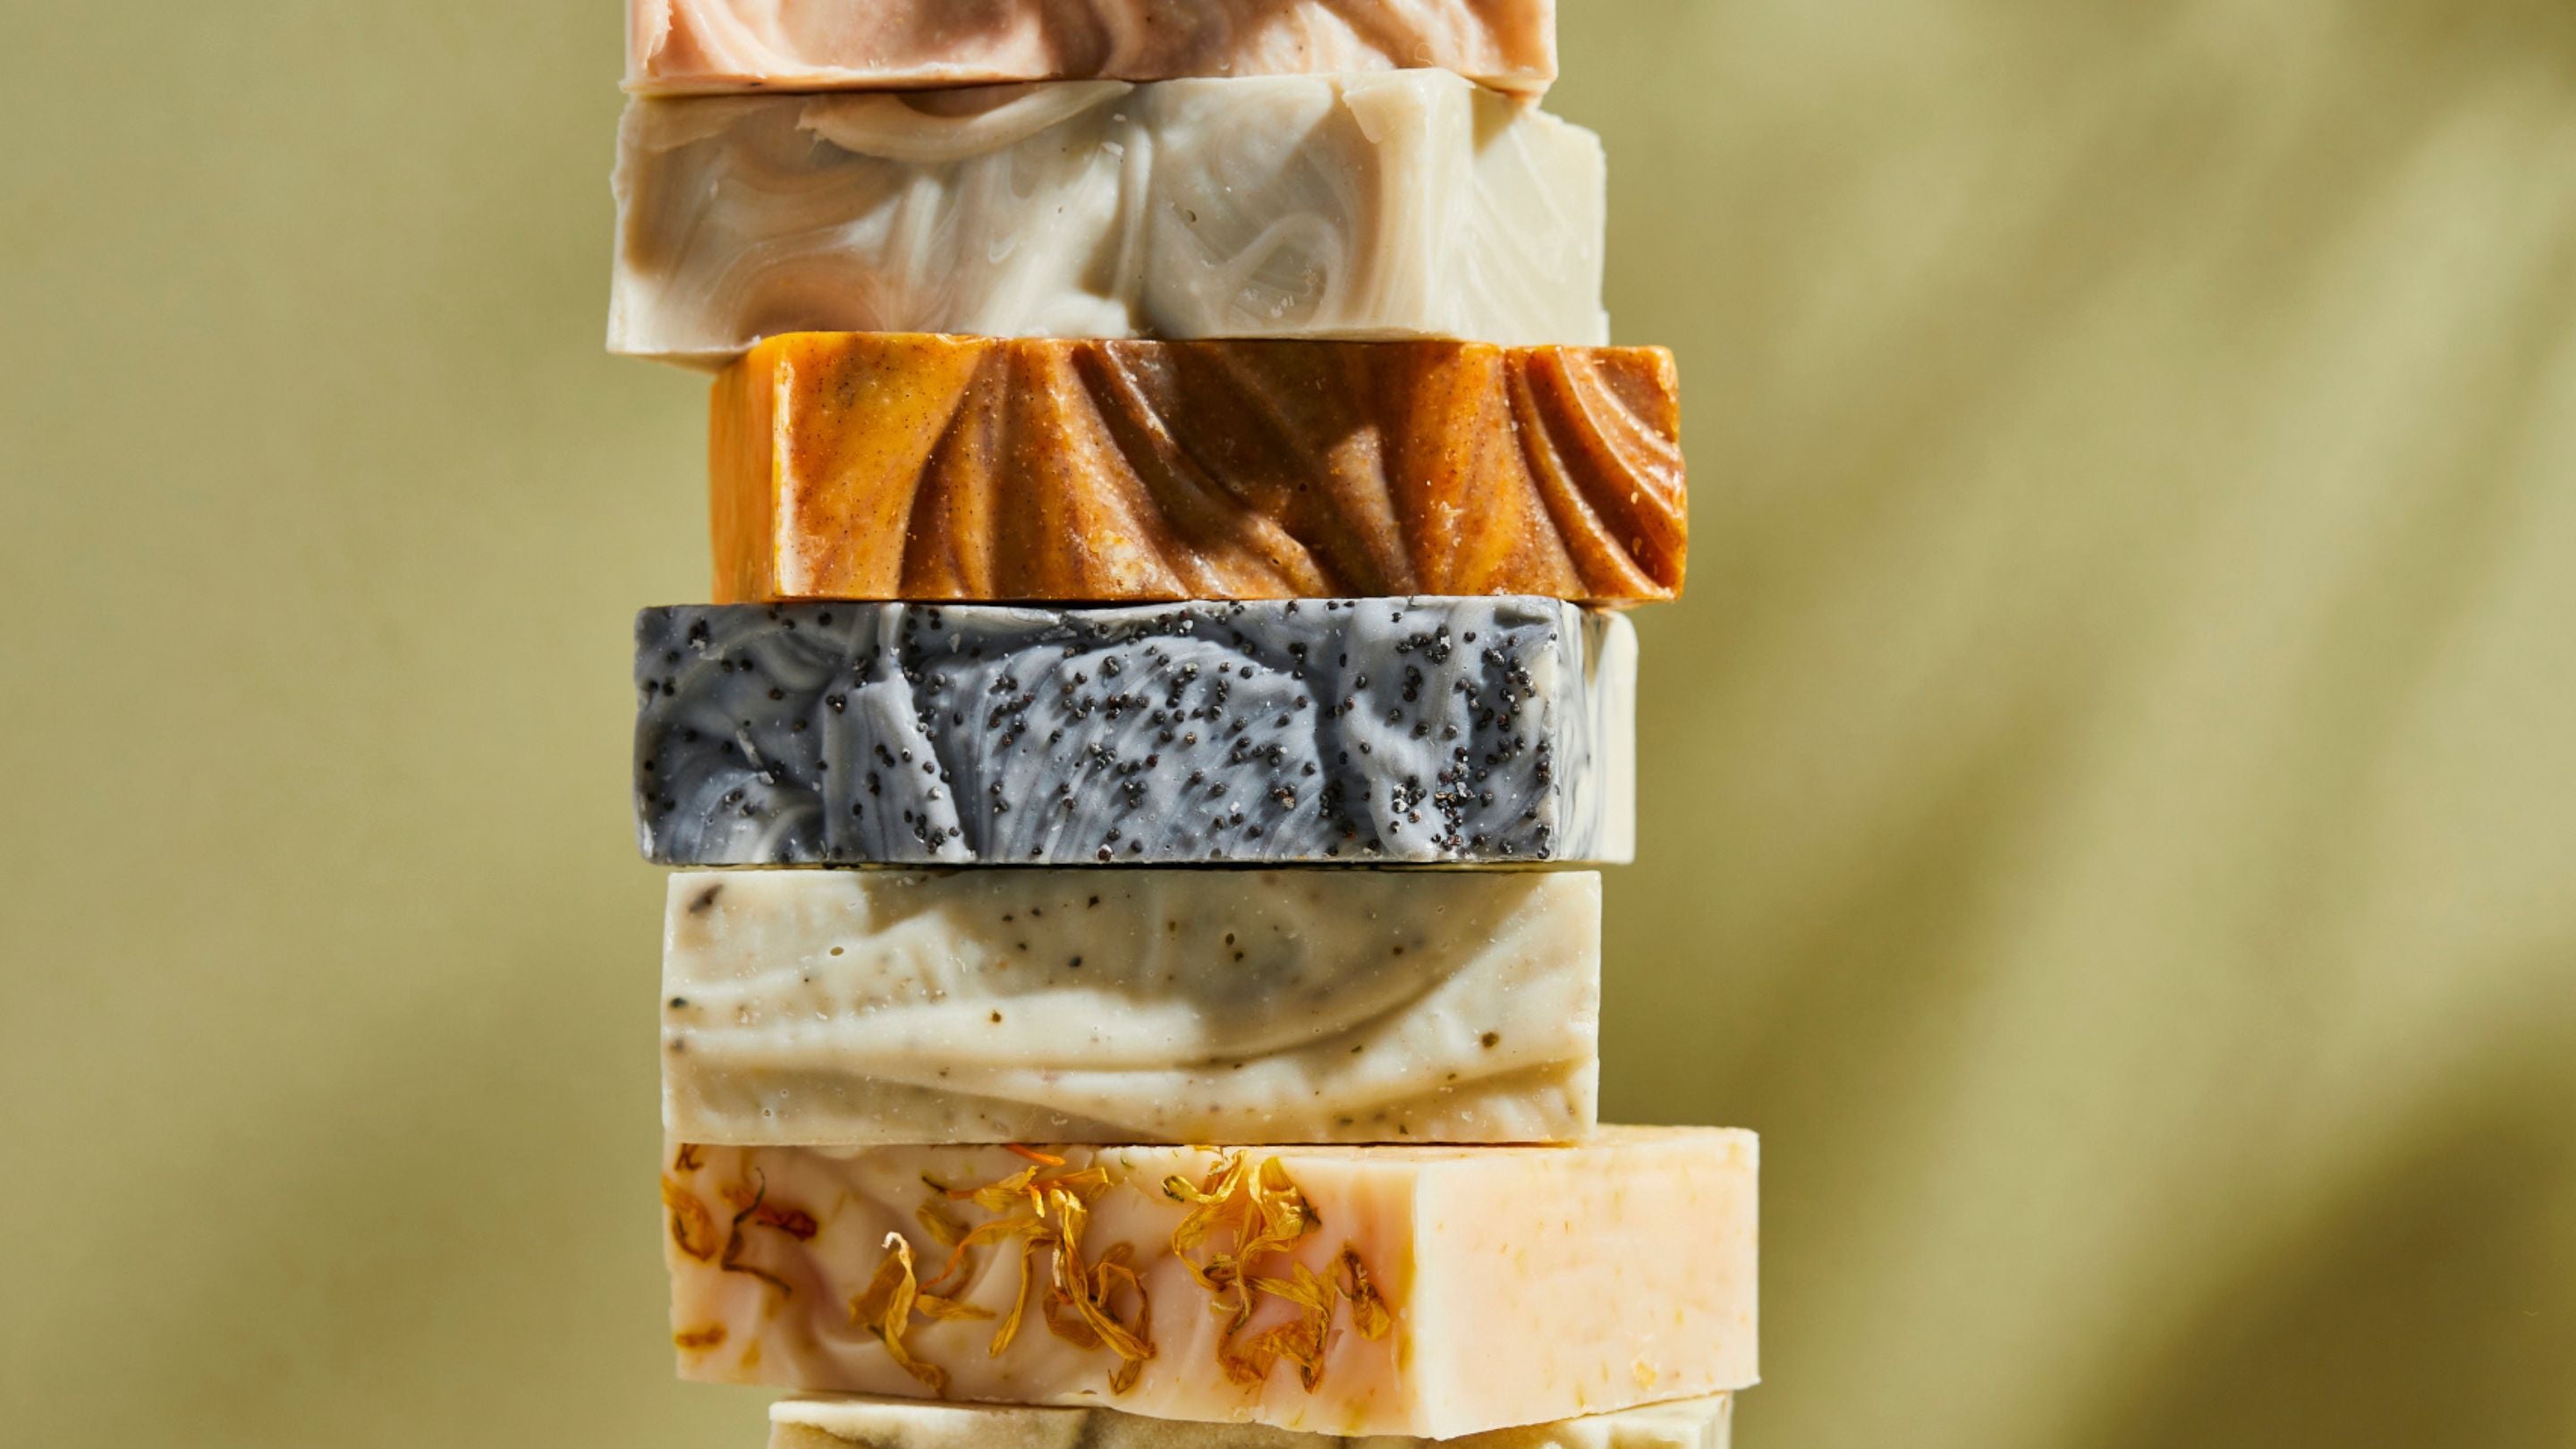 Natural bath and body care soap stack